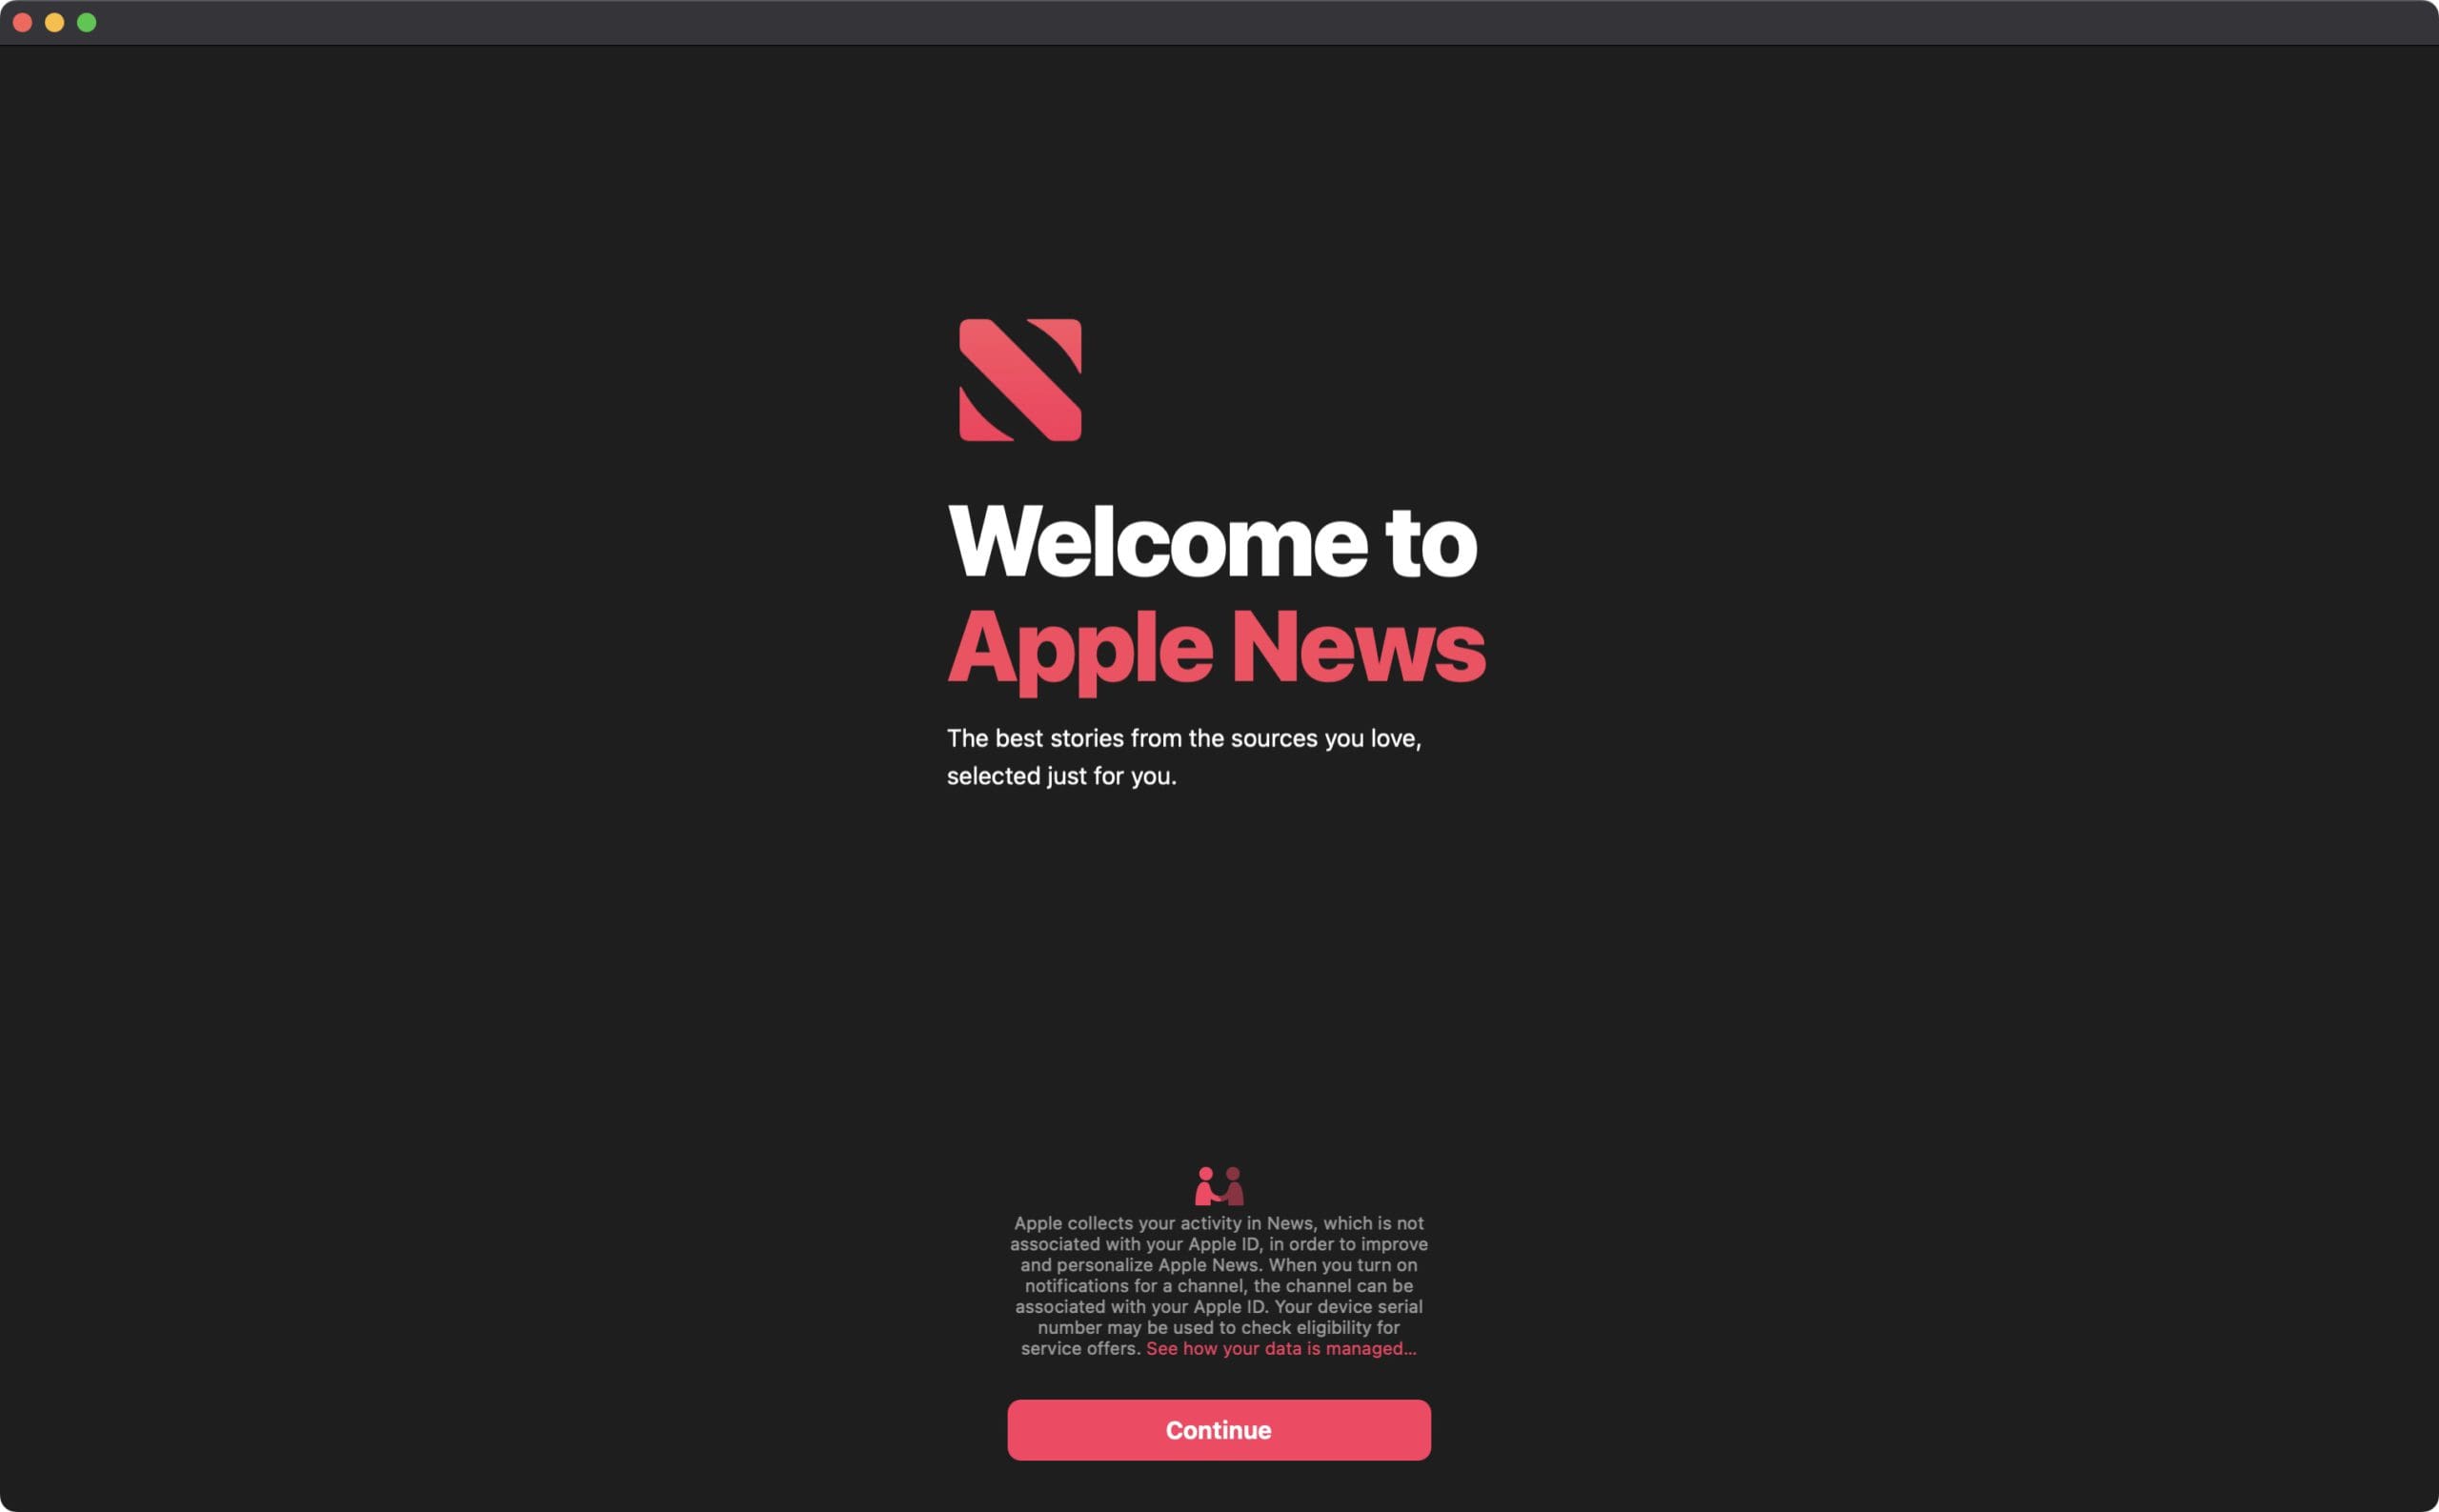 How to Use Apple News in macOS - 8